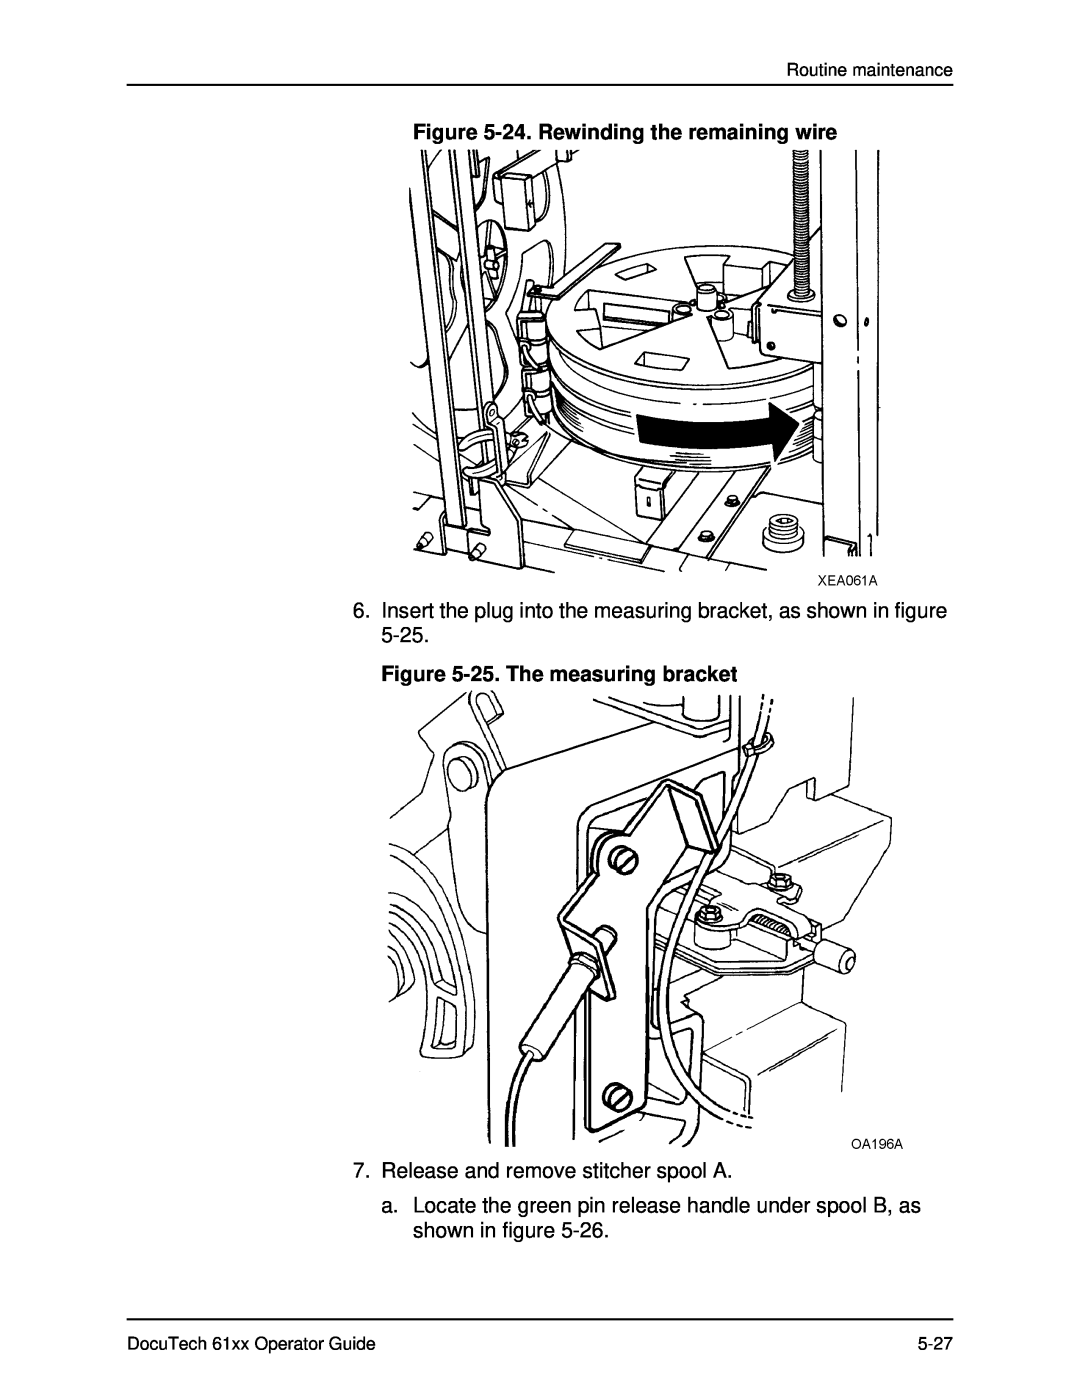 Xerox 61xx manual 24. Rewinding the remaining wire, 25. The measuring bracket, Release and remove stitcher spool A 